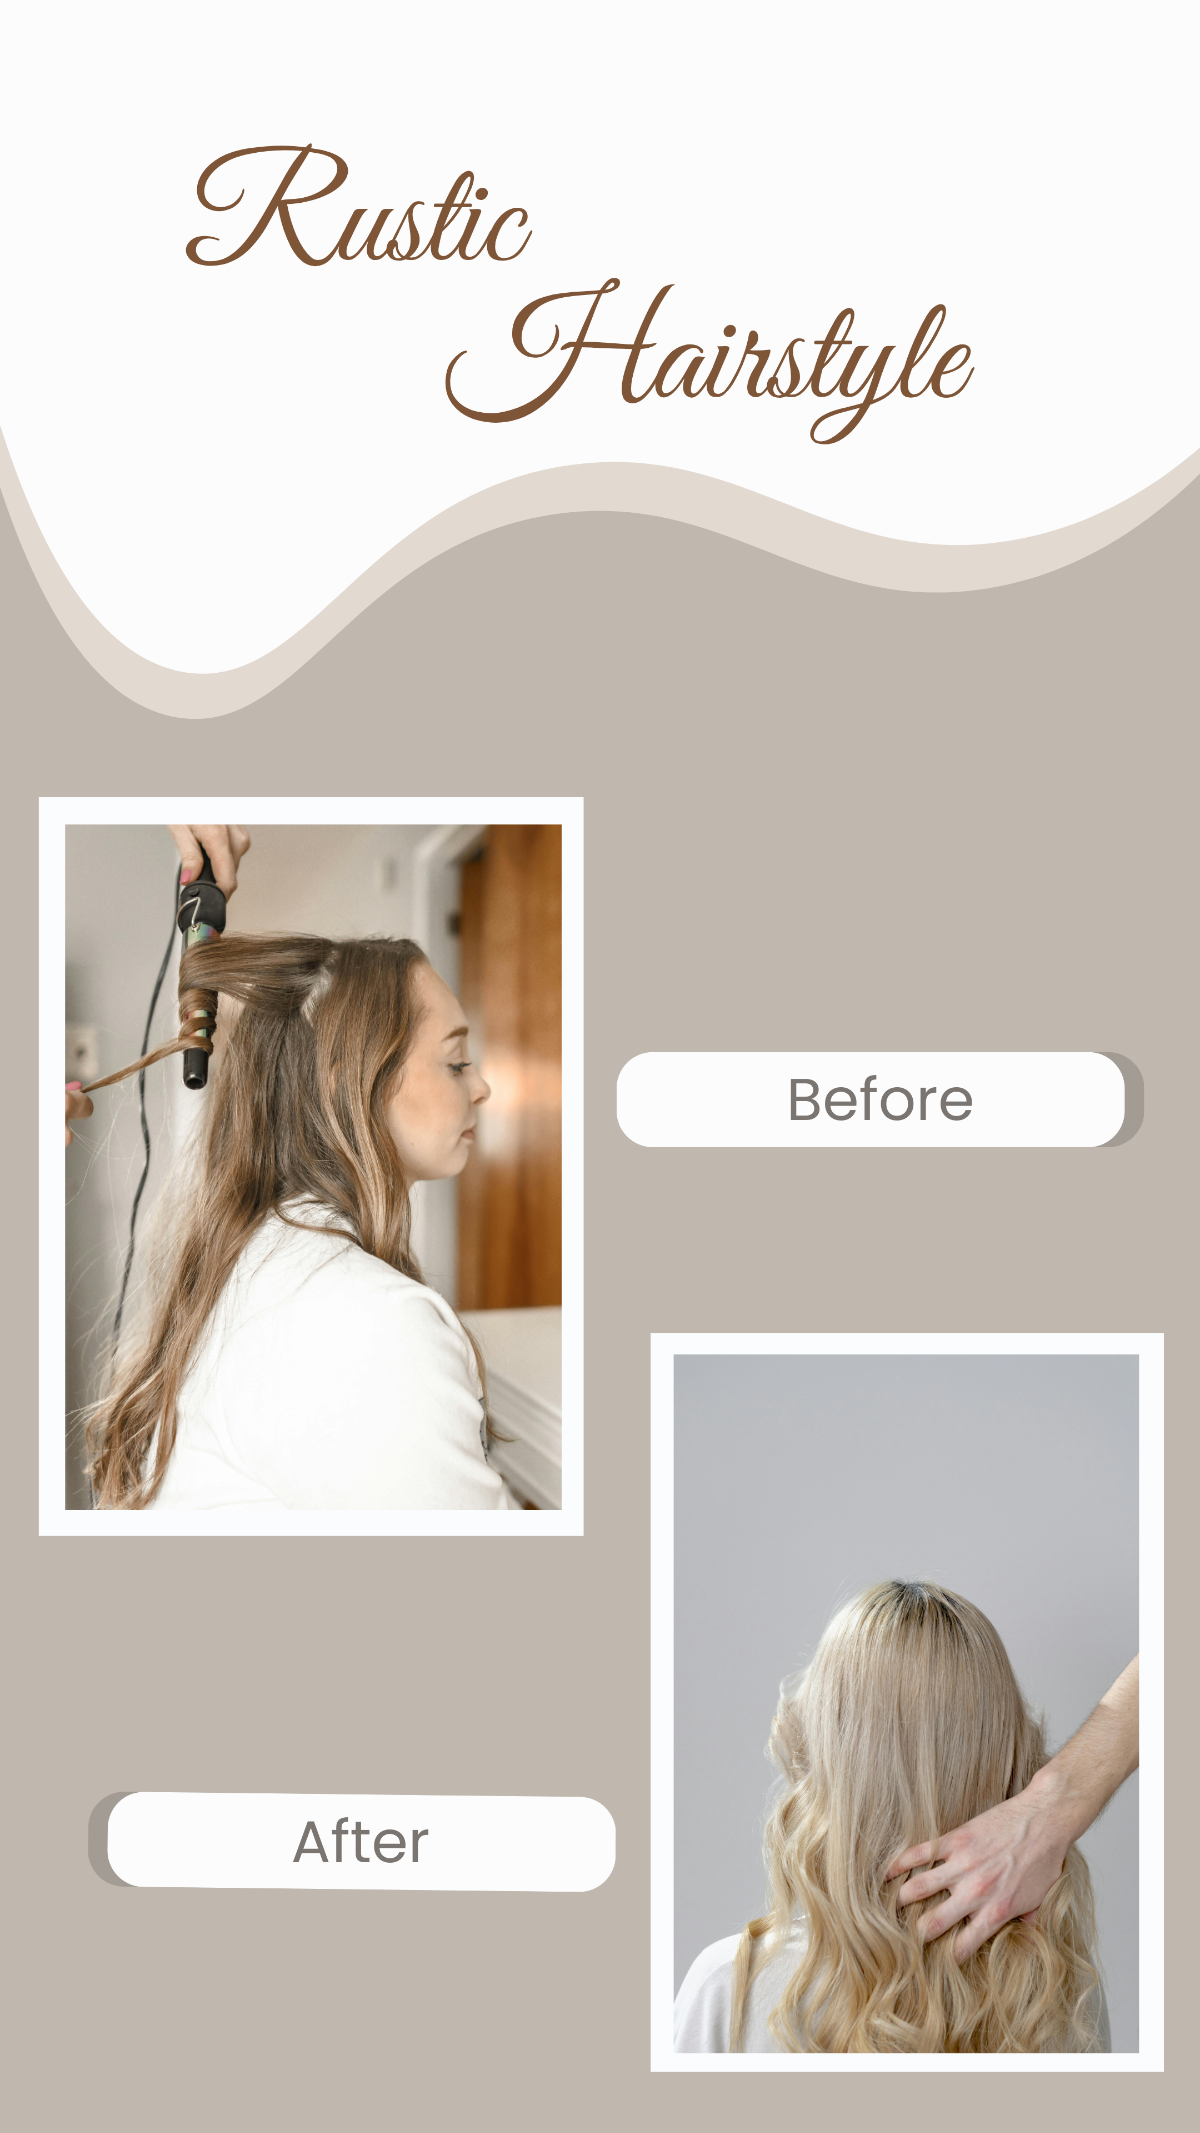 Free Photos Rustic Hairstyle Instagram Story